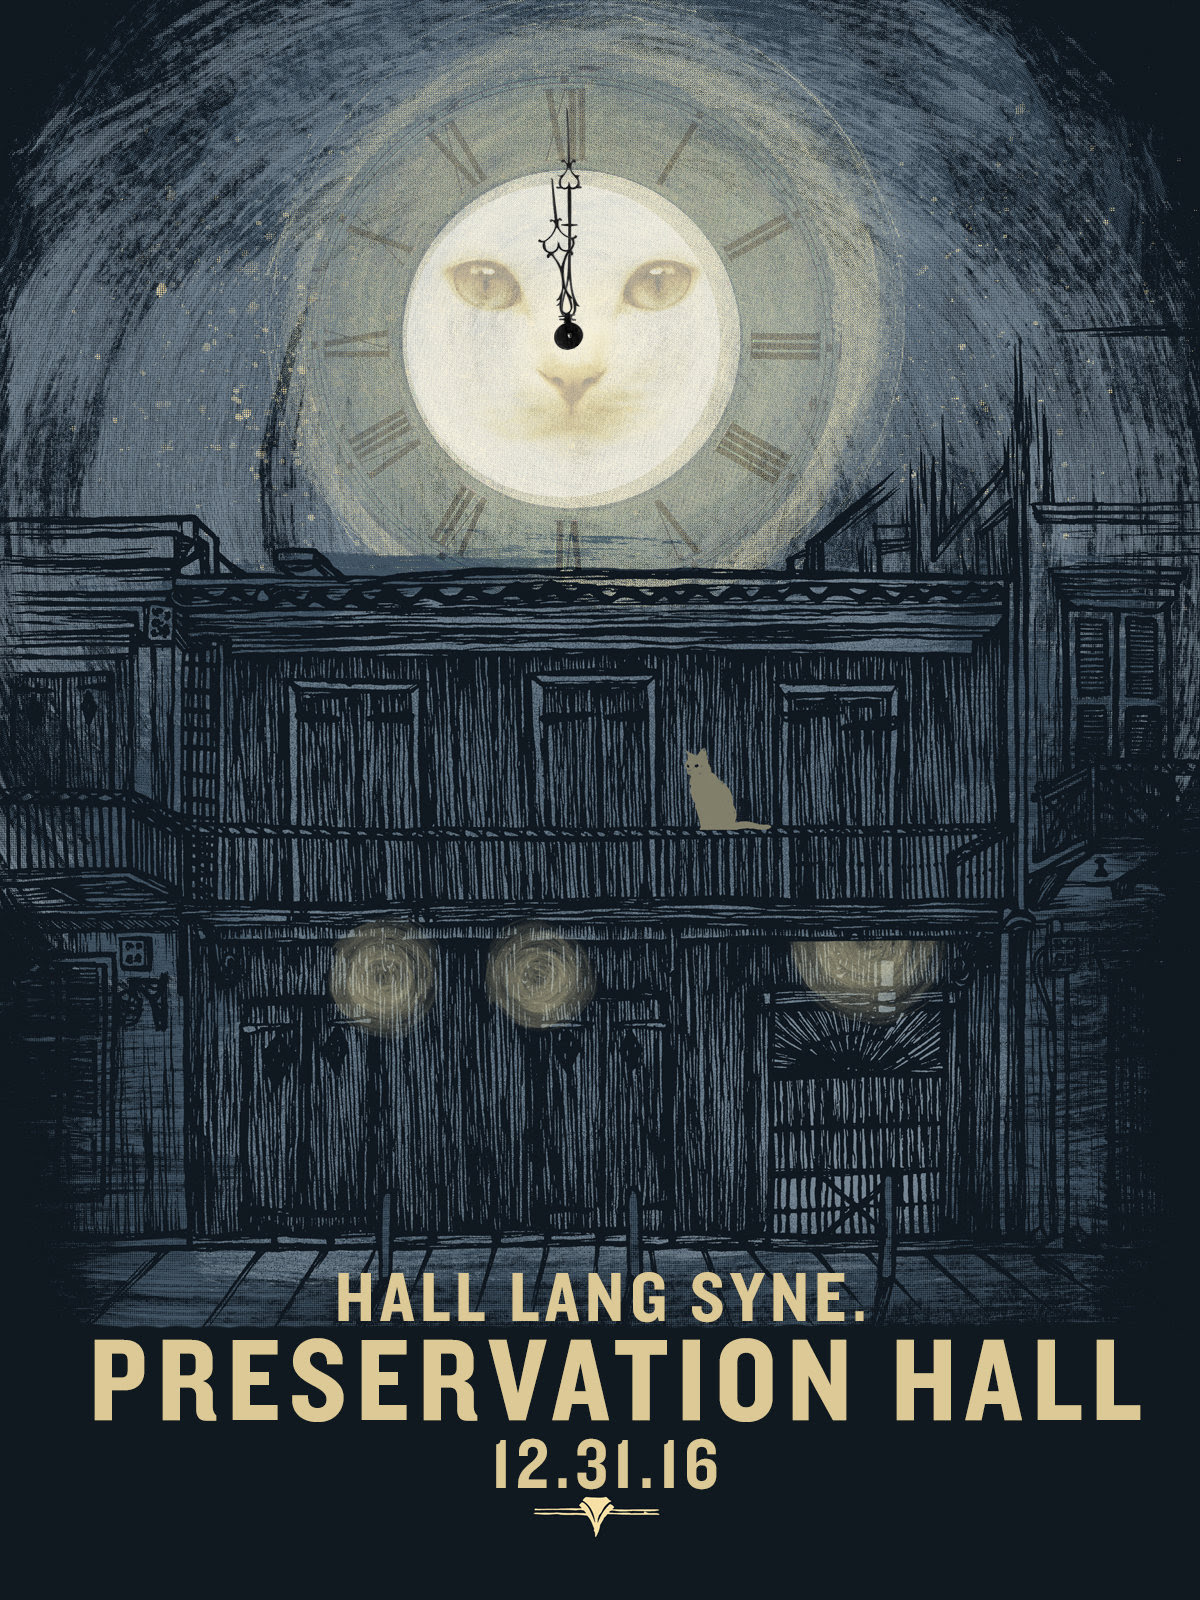 New Year's Eve at Preservation Hall